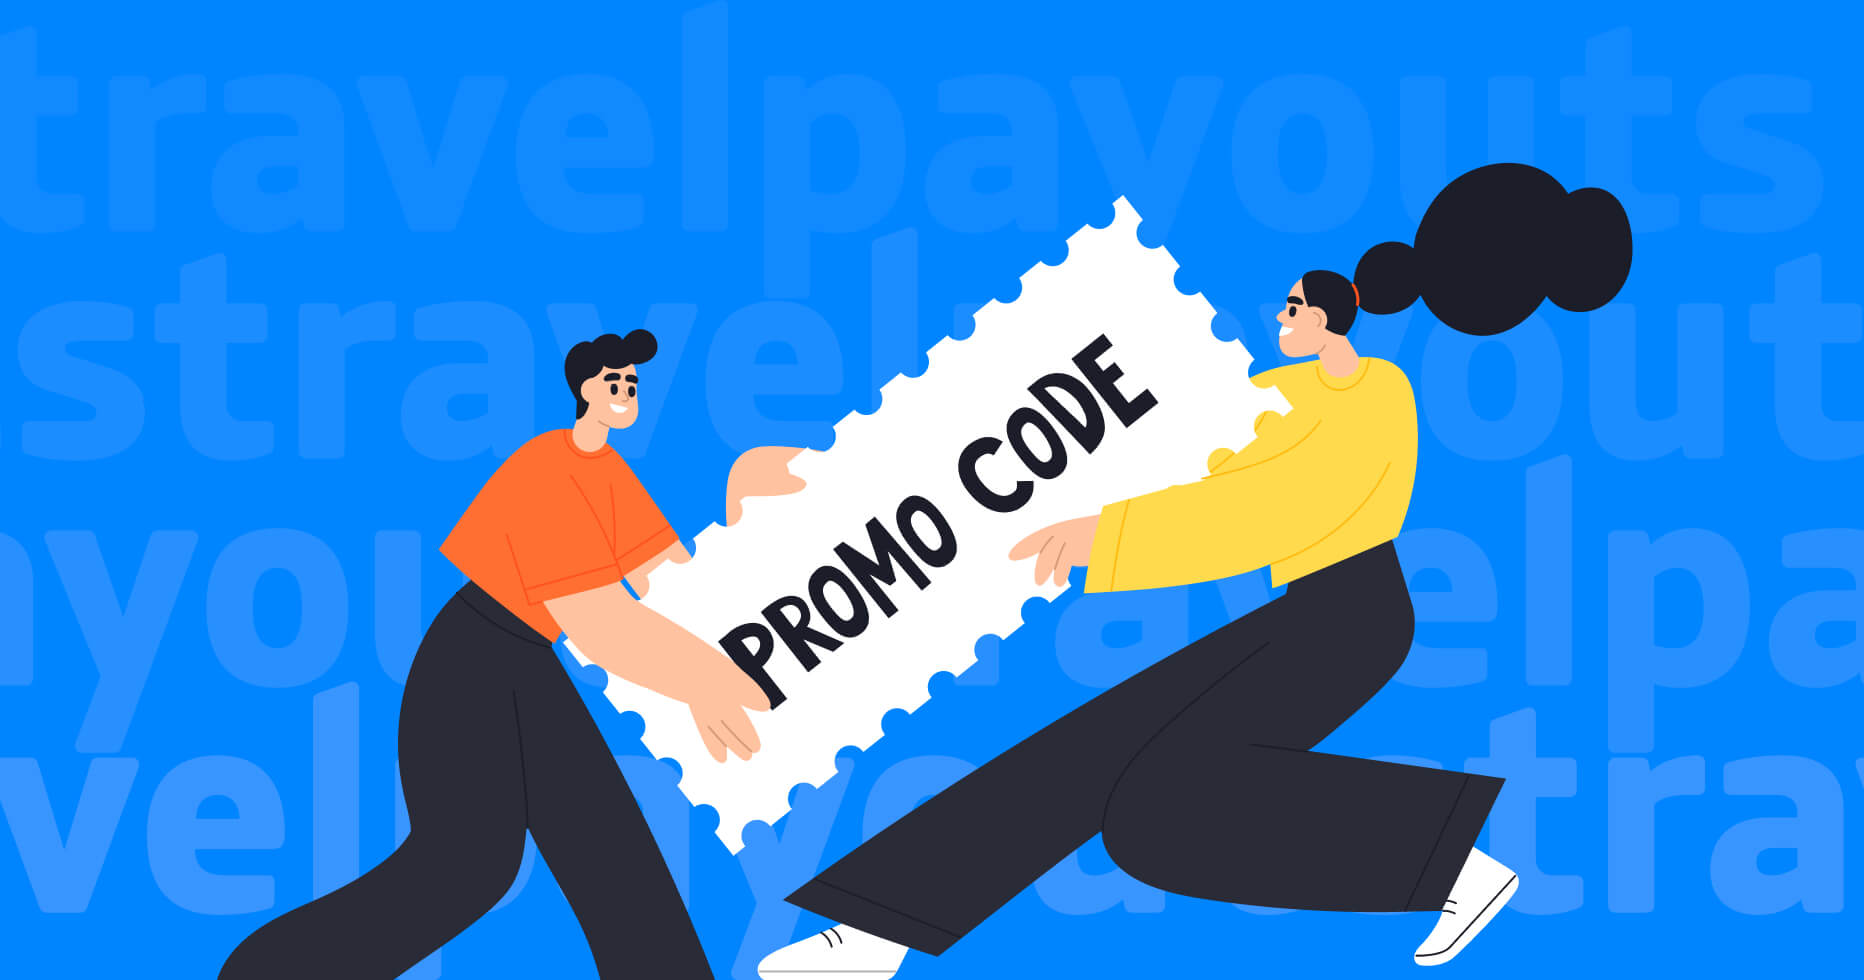 What are promotional codes and how do they work?